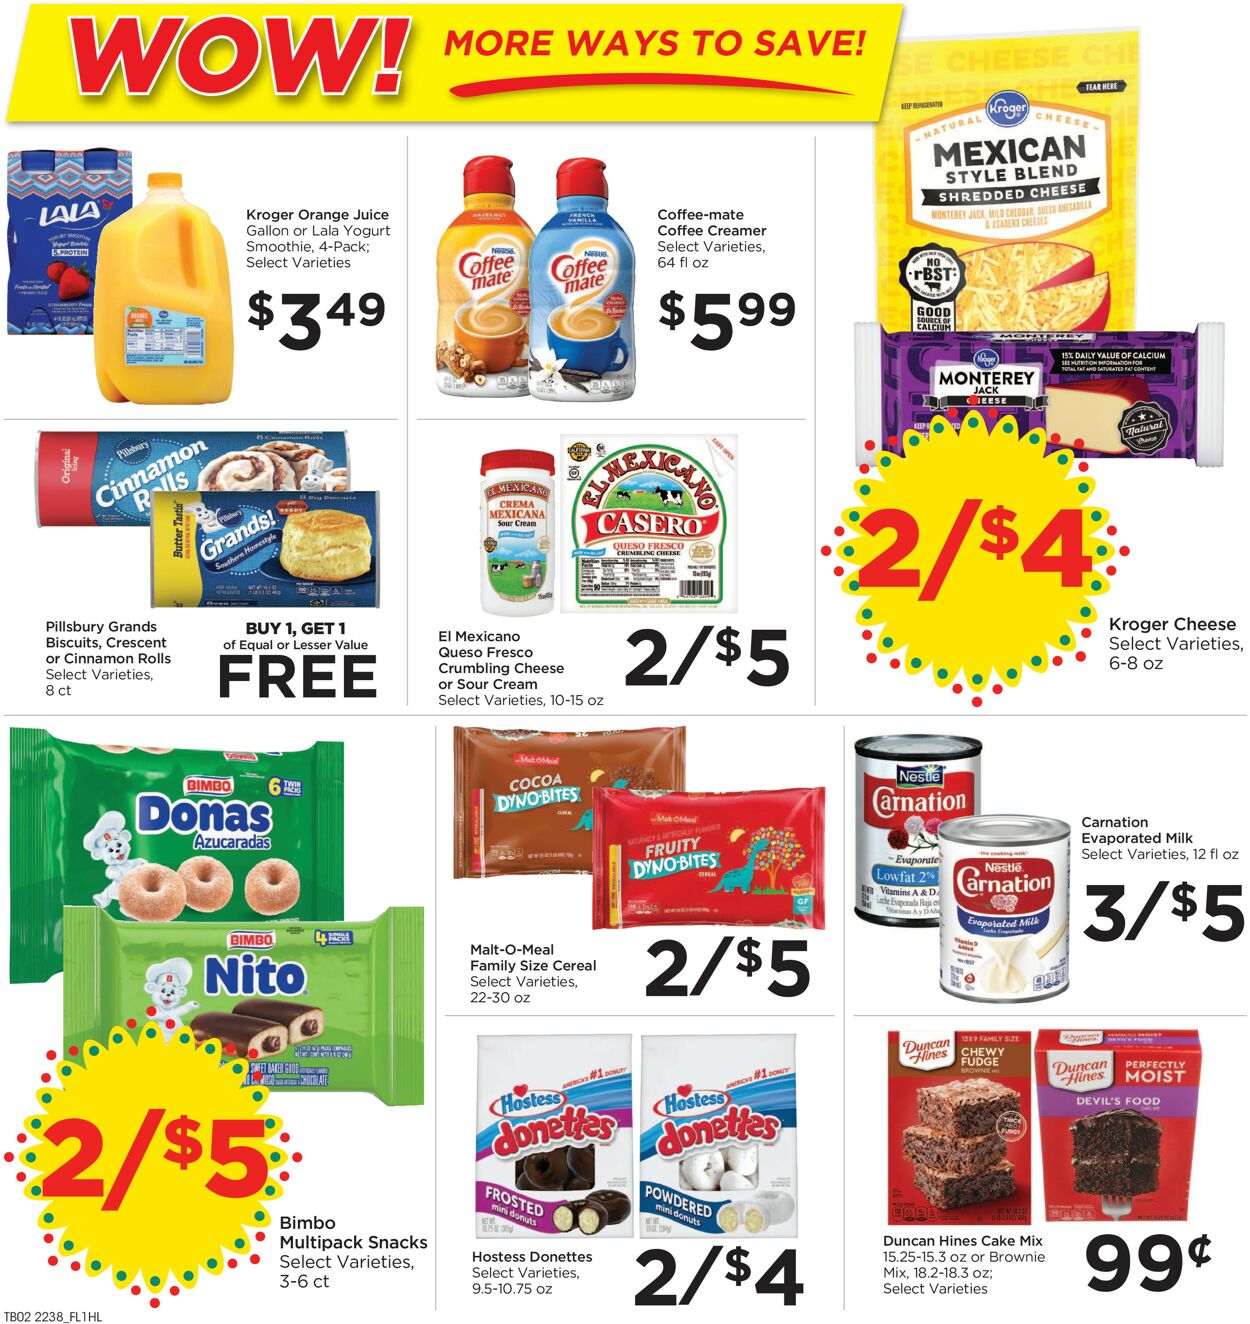 Catalogue Food 4 Less from 10/19/2022